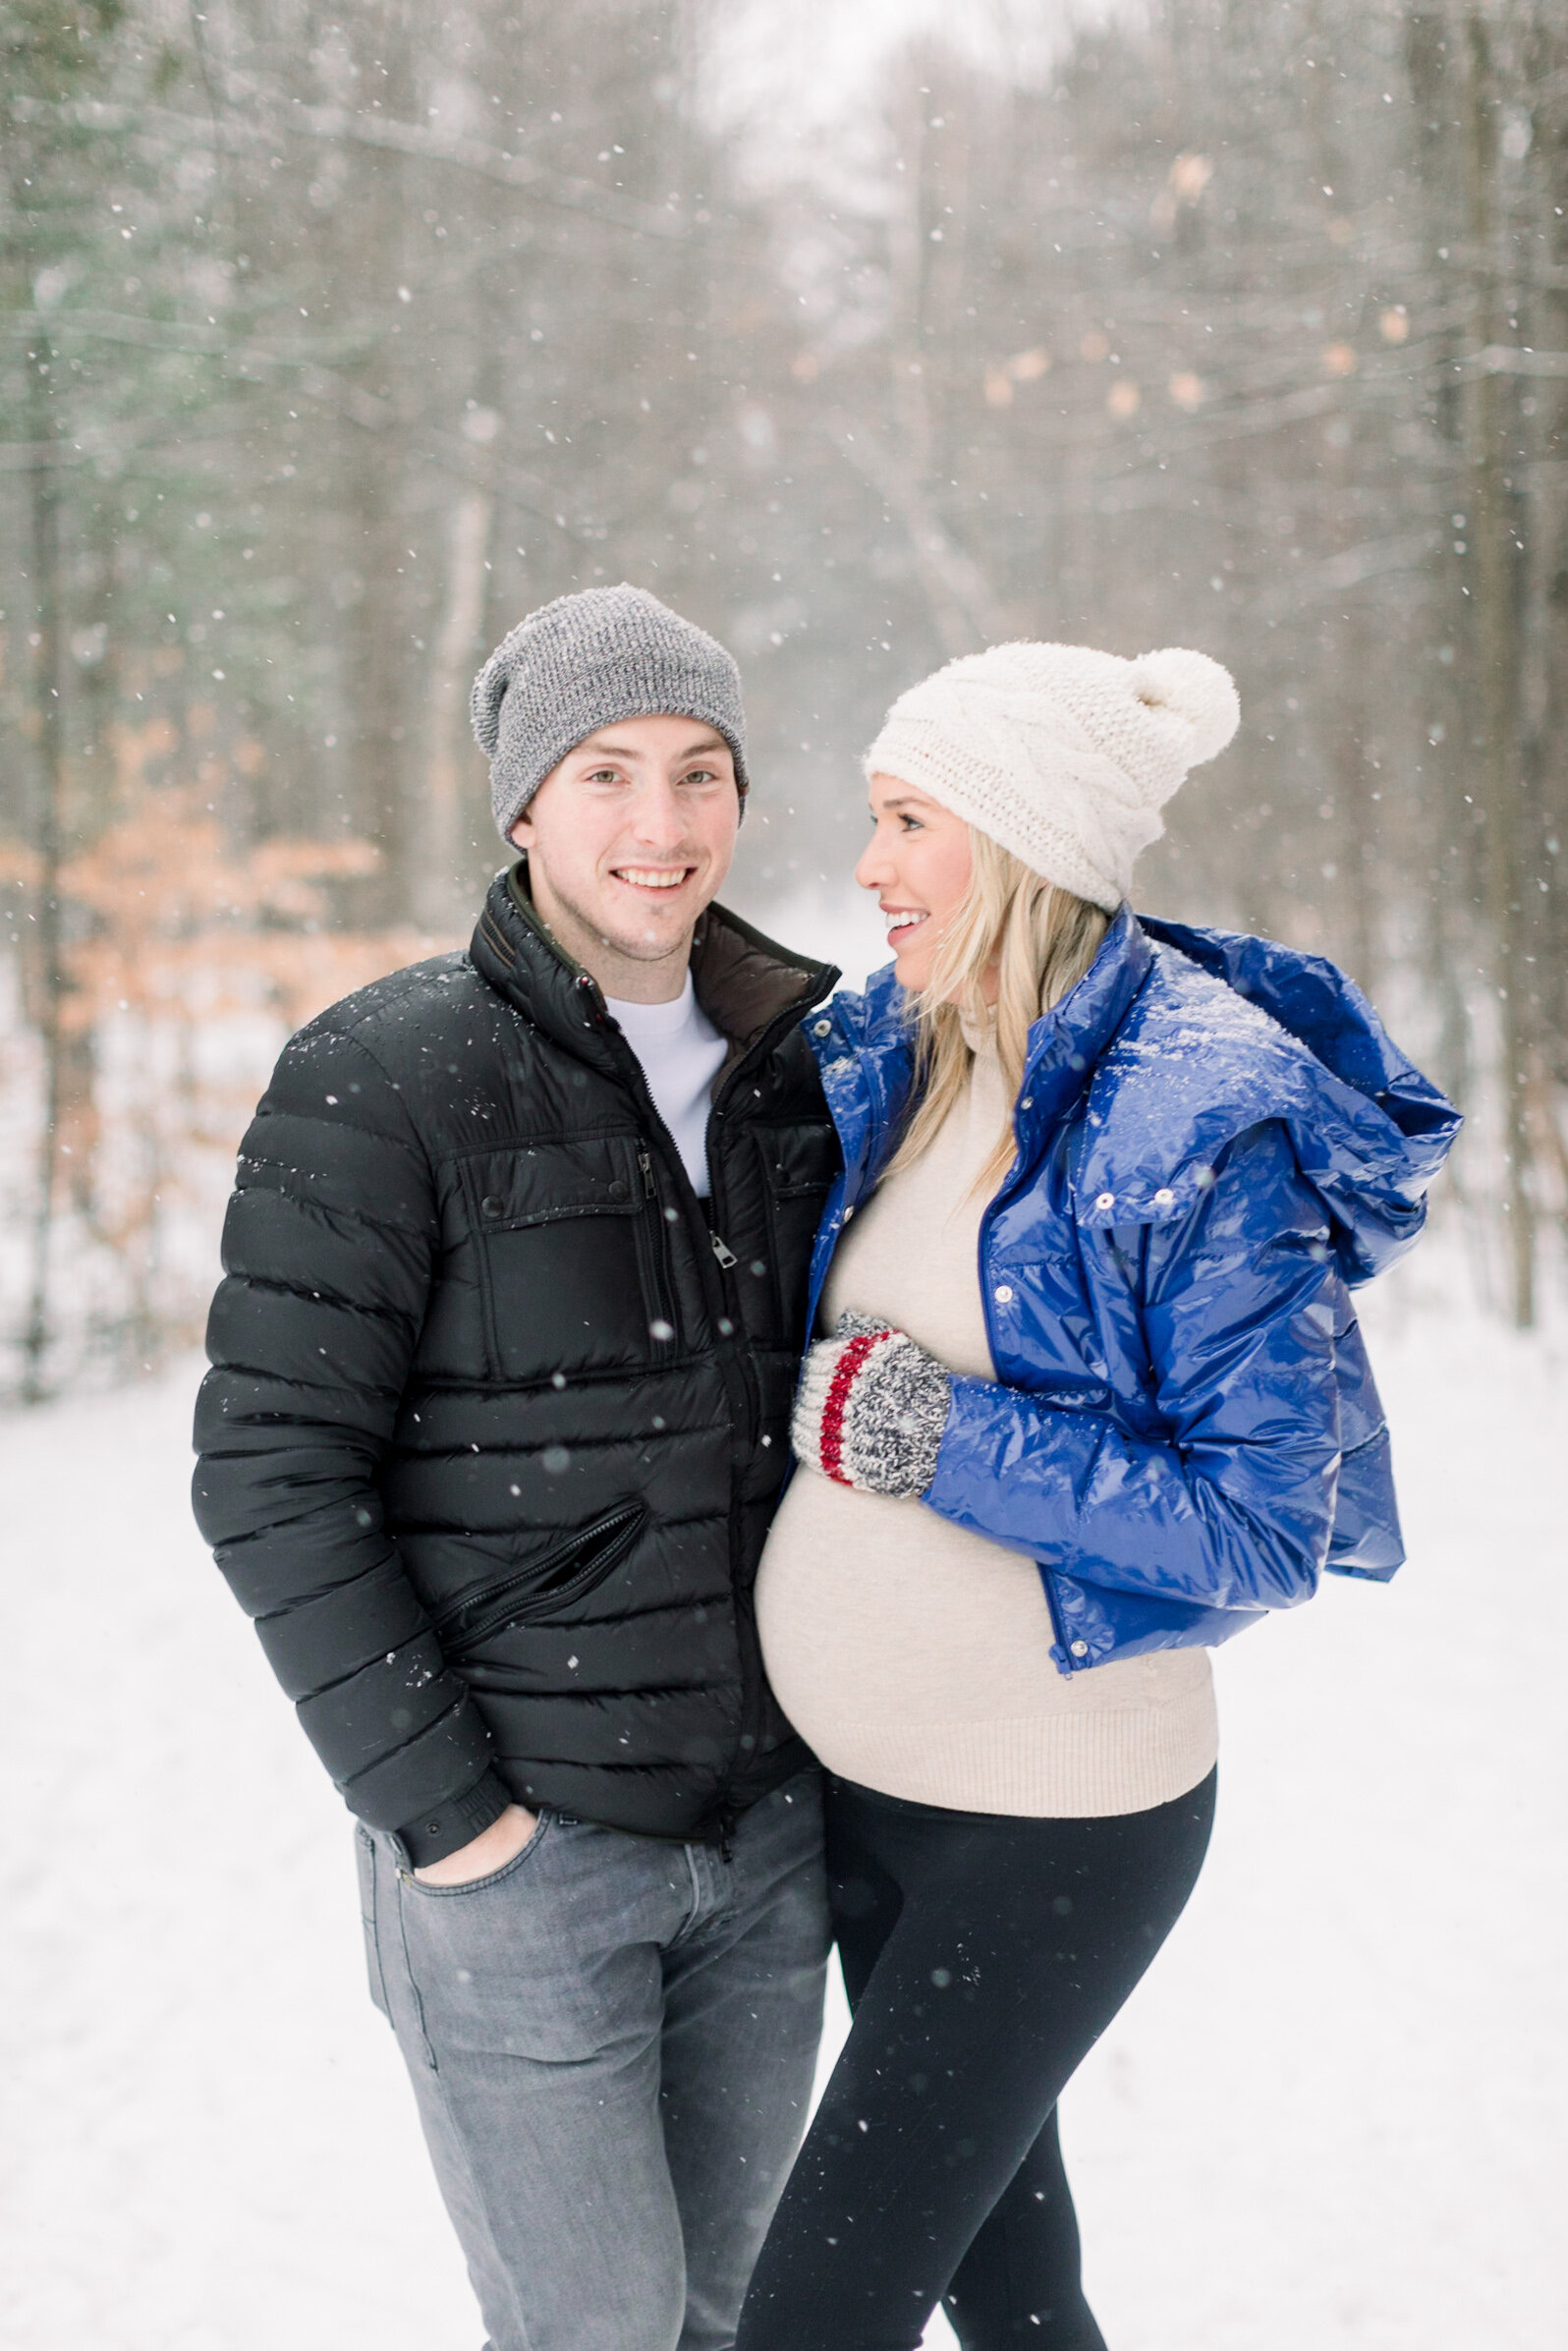  A beautiful pregnant woman looks lovingly at her husband in a winter themed maternity session in Pinhey’s Trails, Ottawa. Couple goals maternity session inspiration ideas and goals winter photo shoot inspiration ideas and goals professional maternit